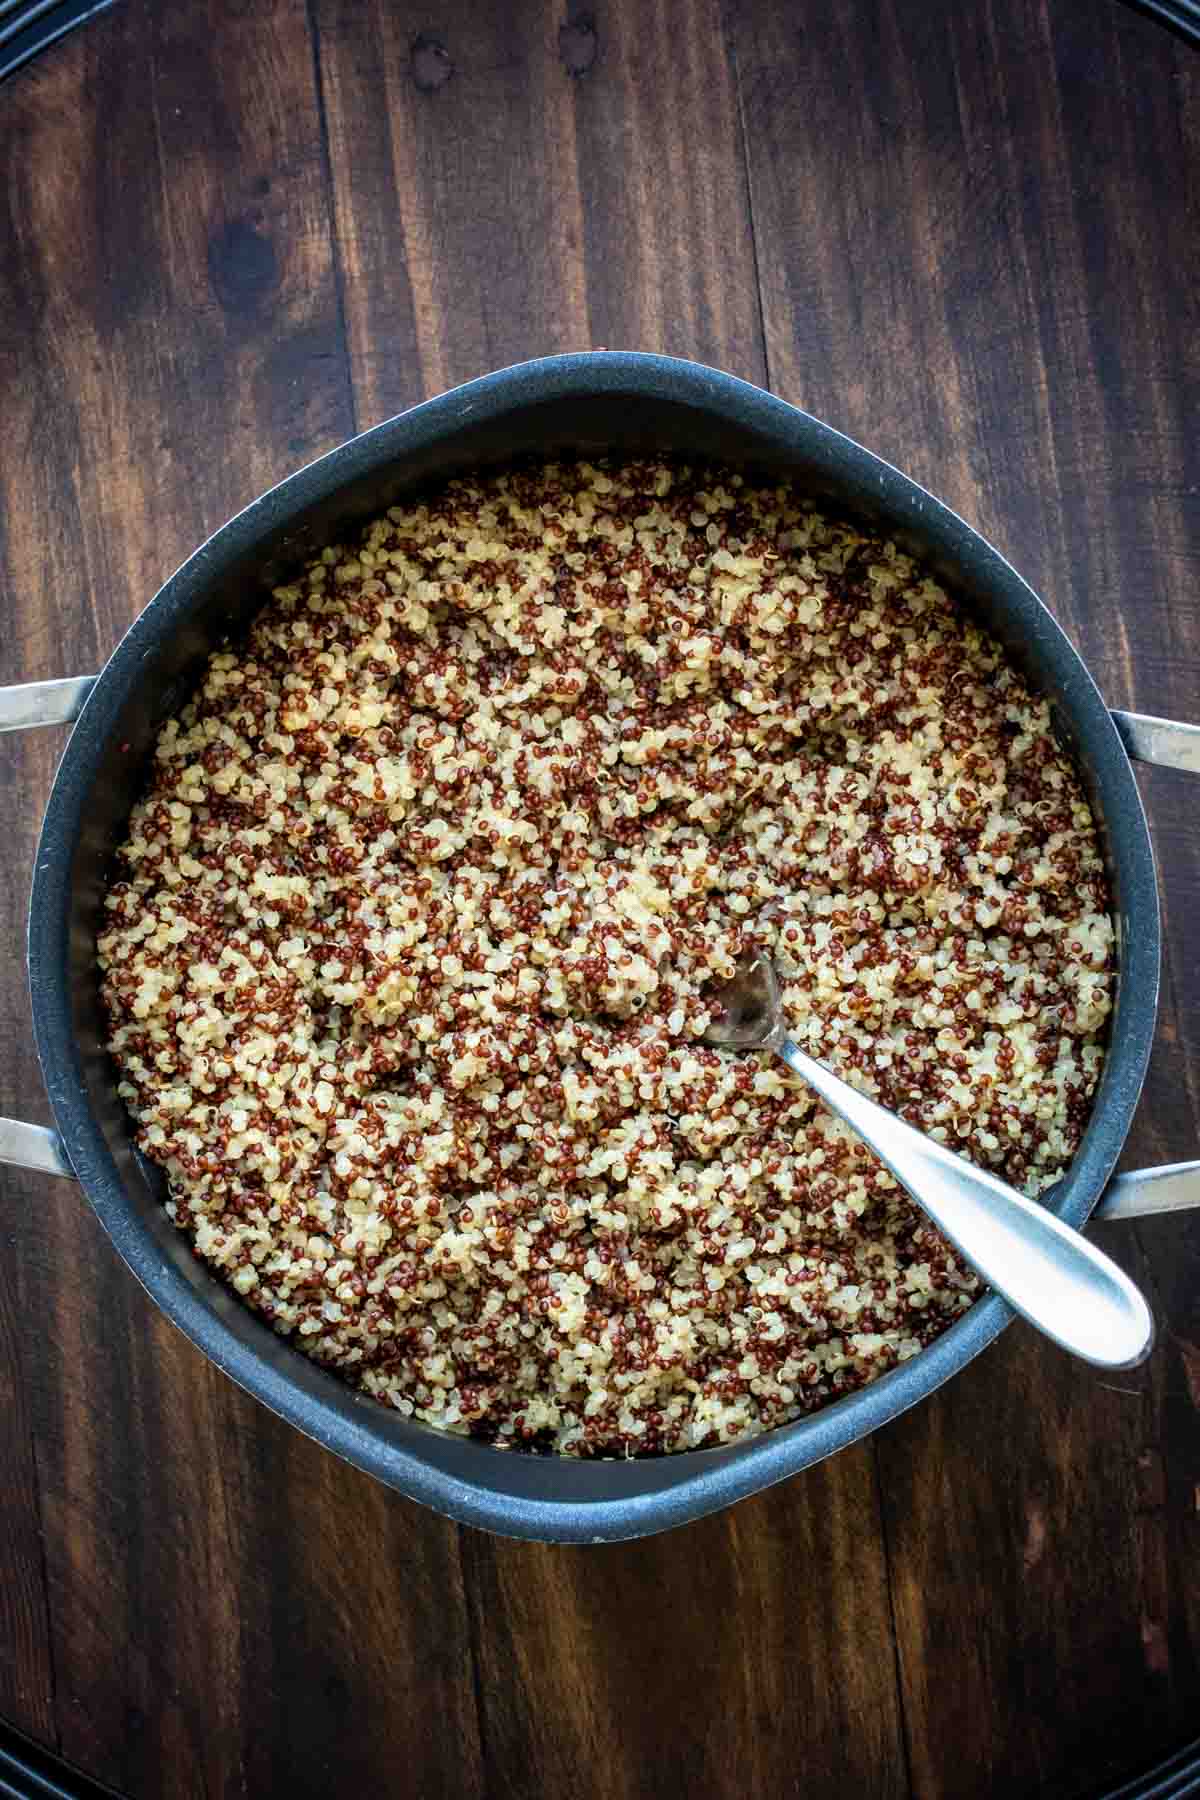 Top view of cooked quinoa in a black pot with a spoon in it.